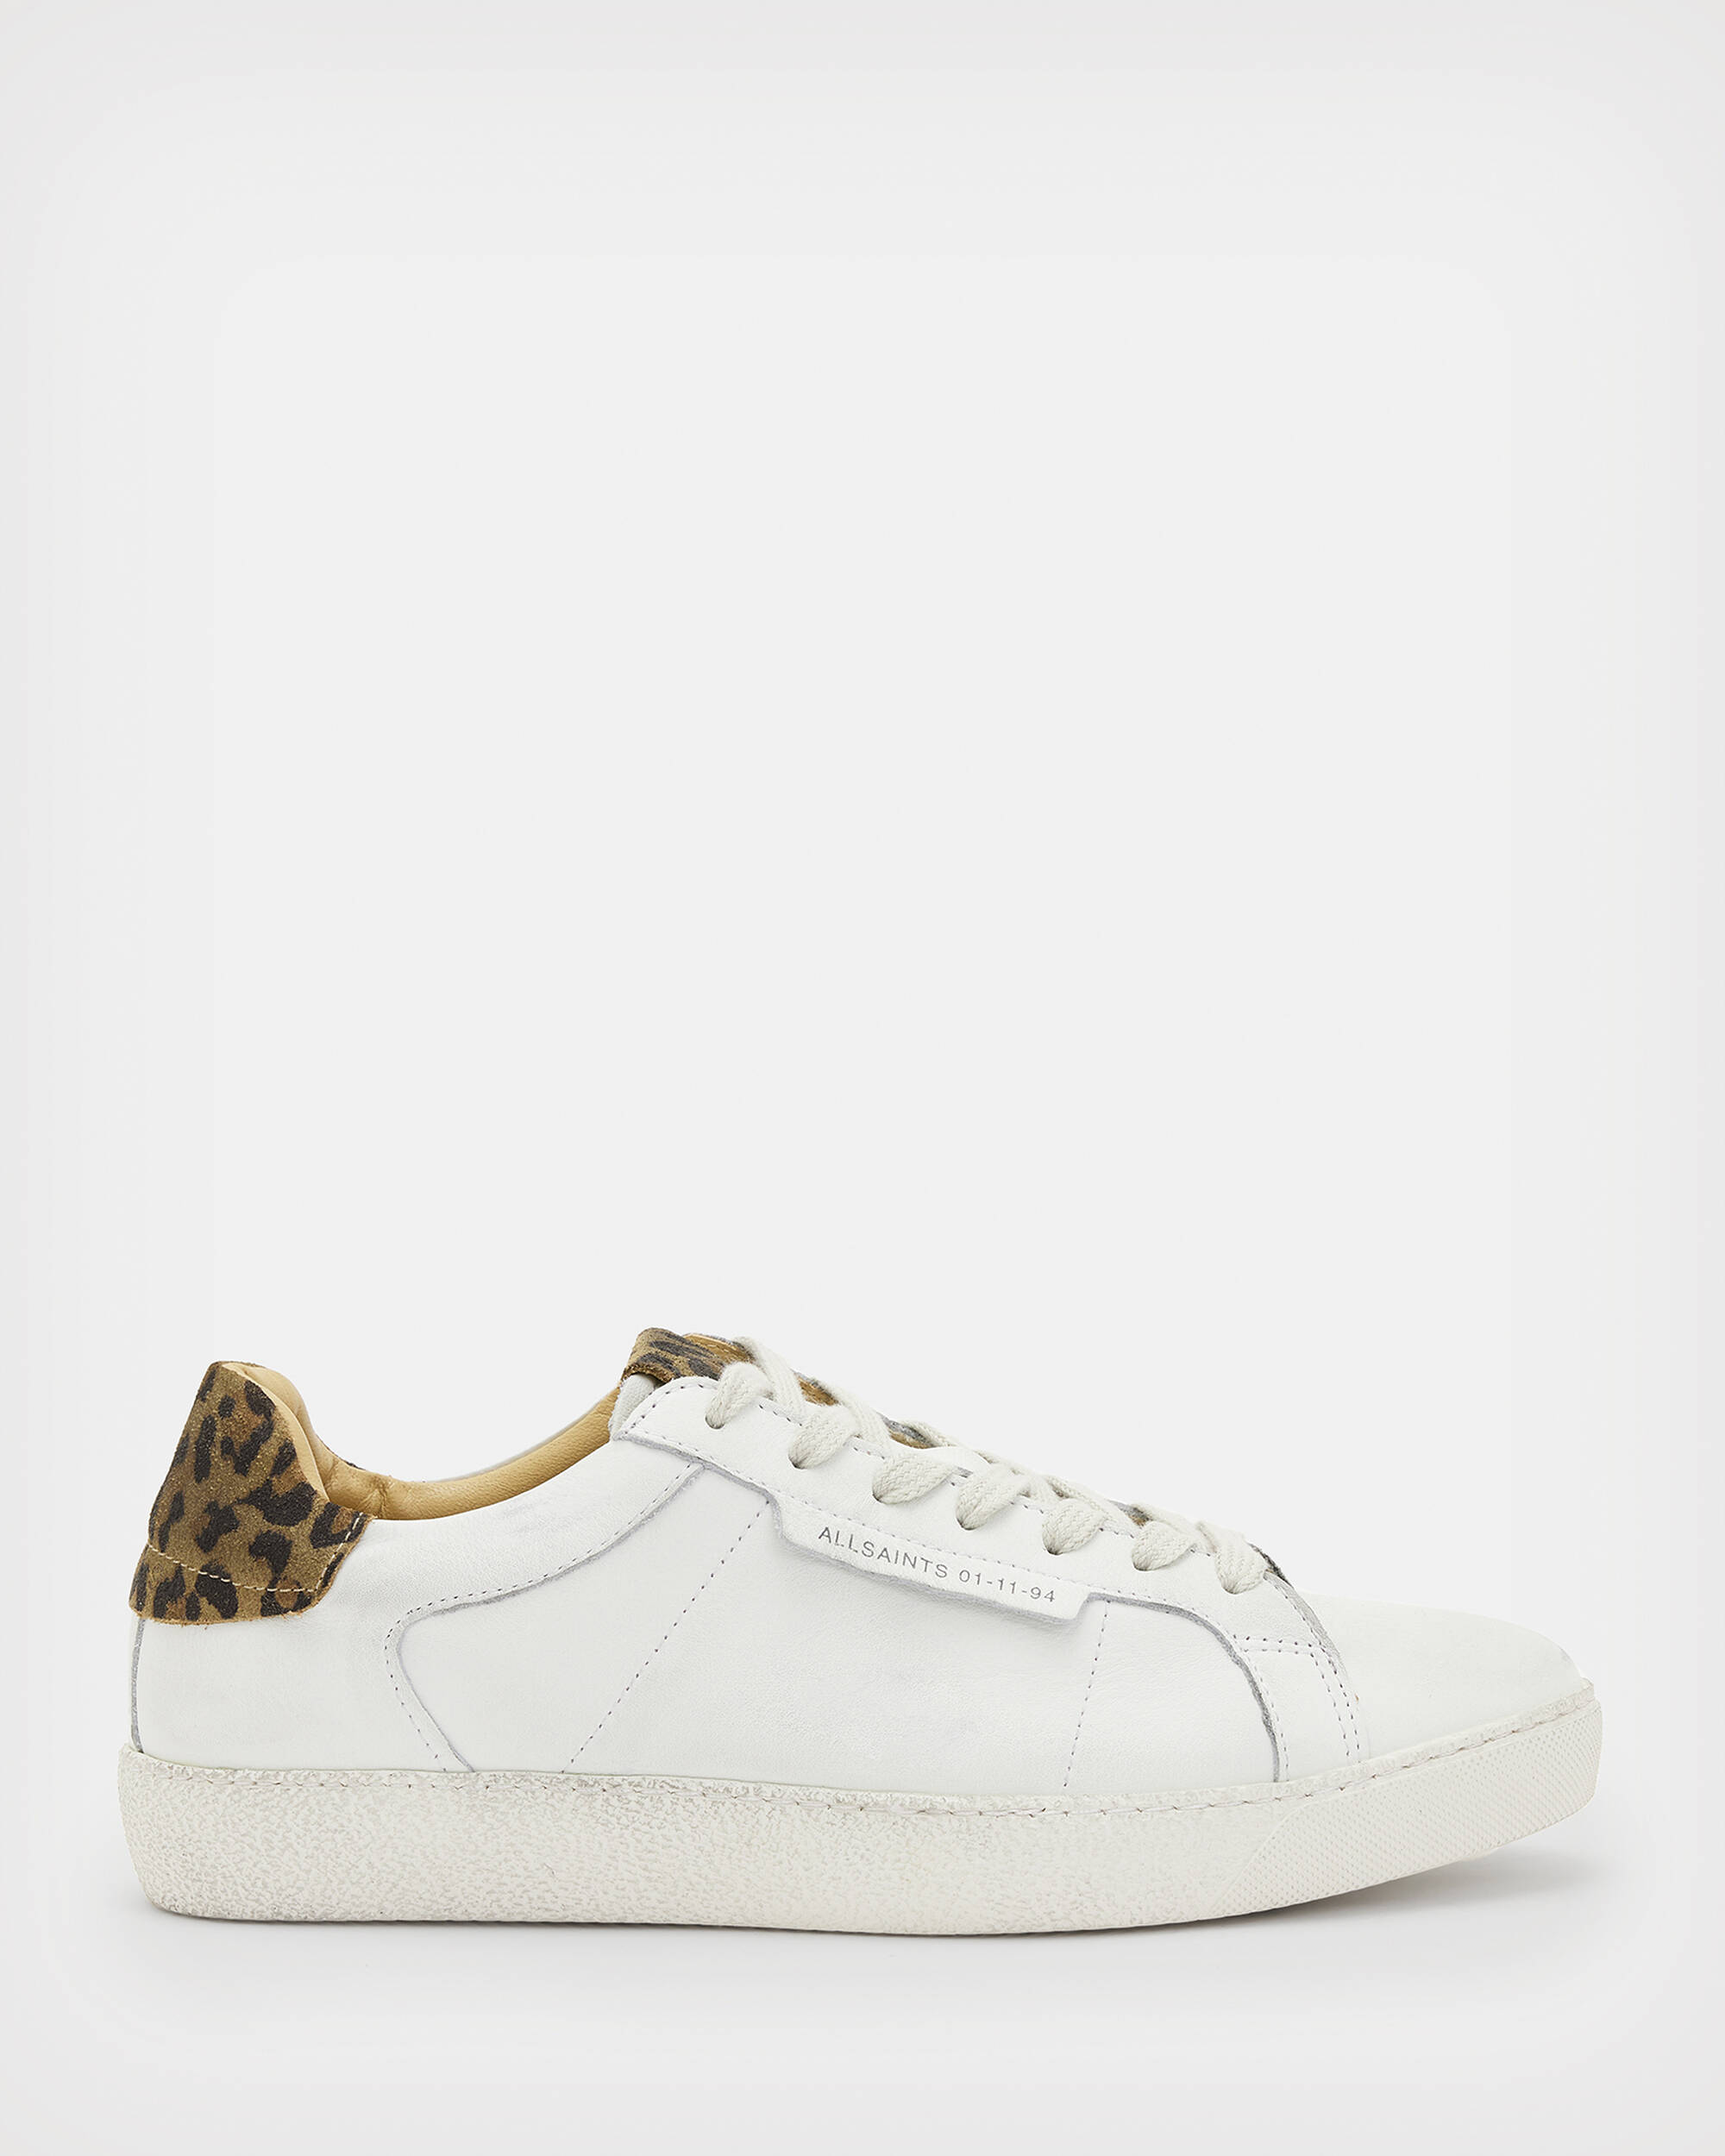 Sheer Leather Leopard Print Sneakers  large image number 1